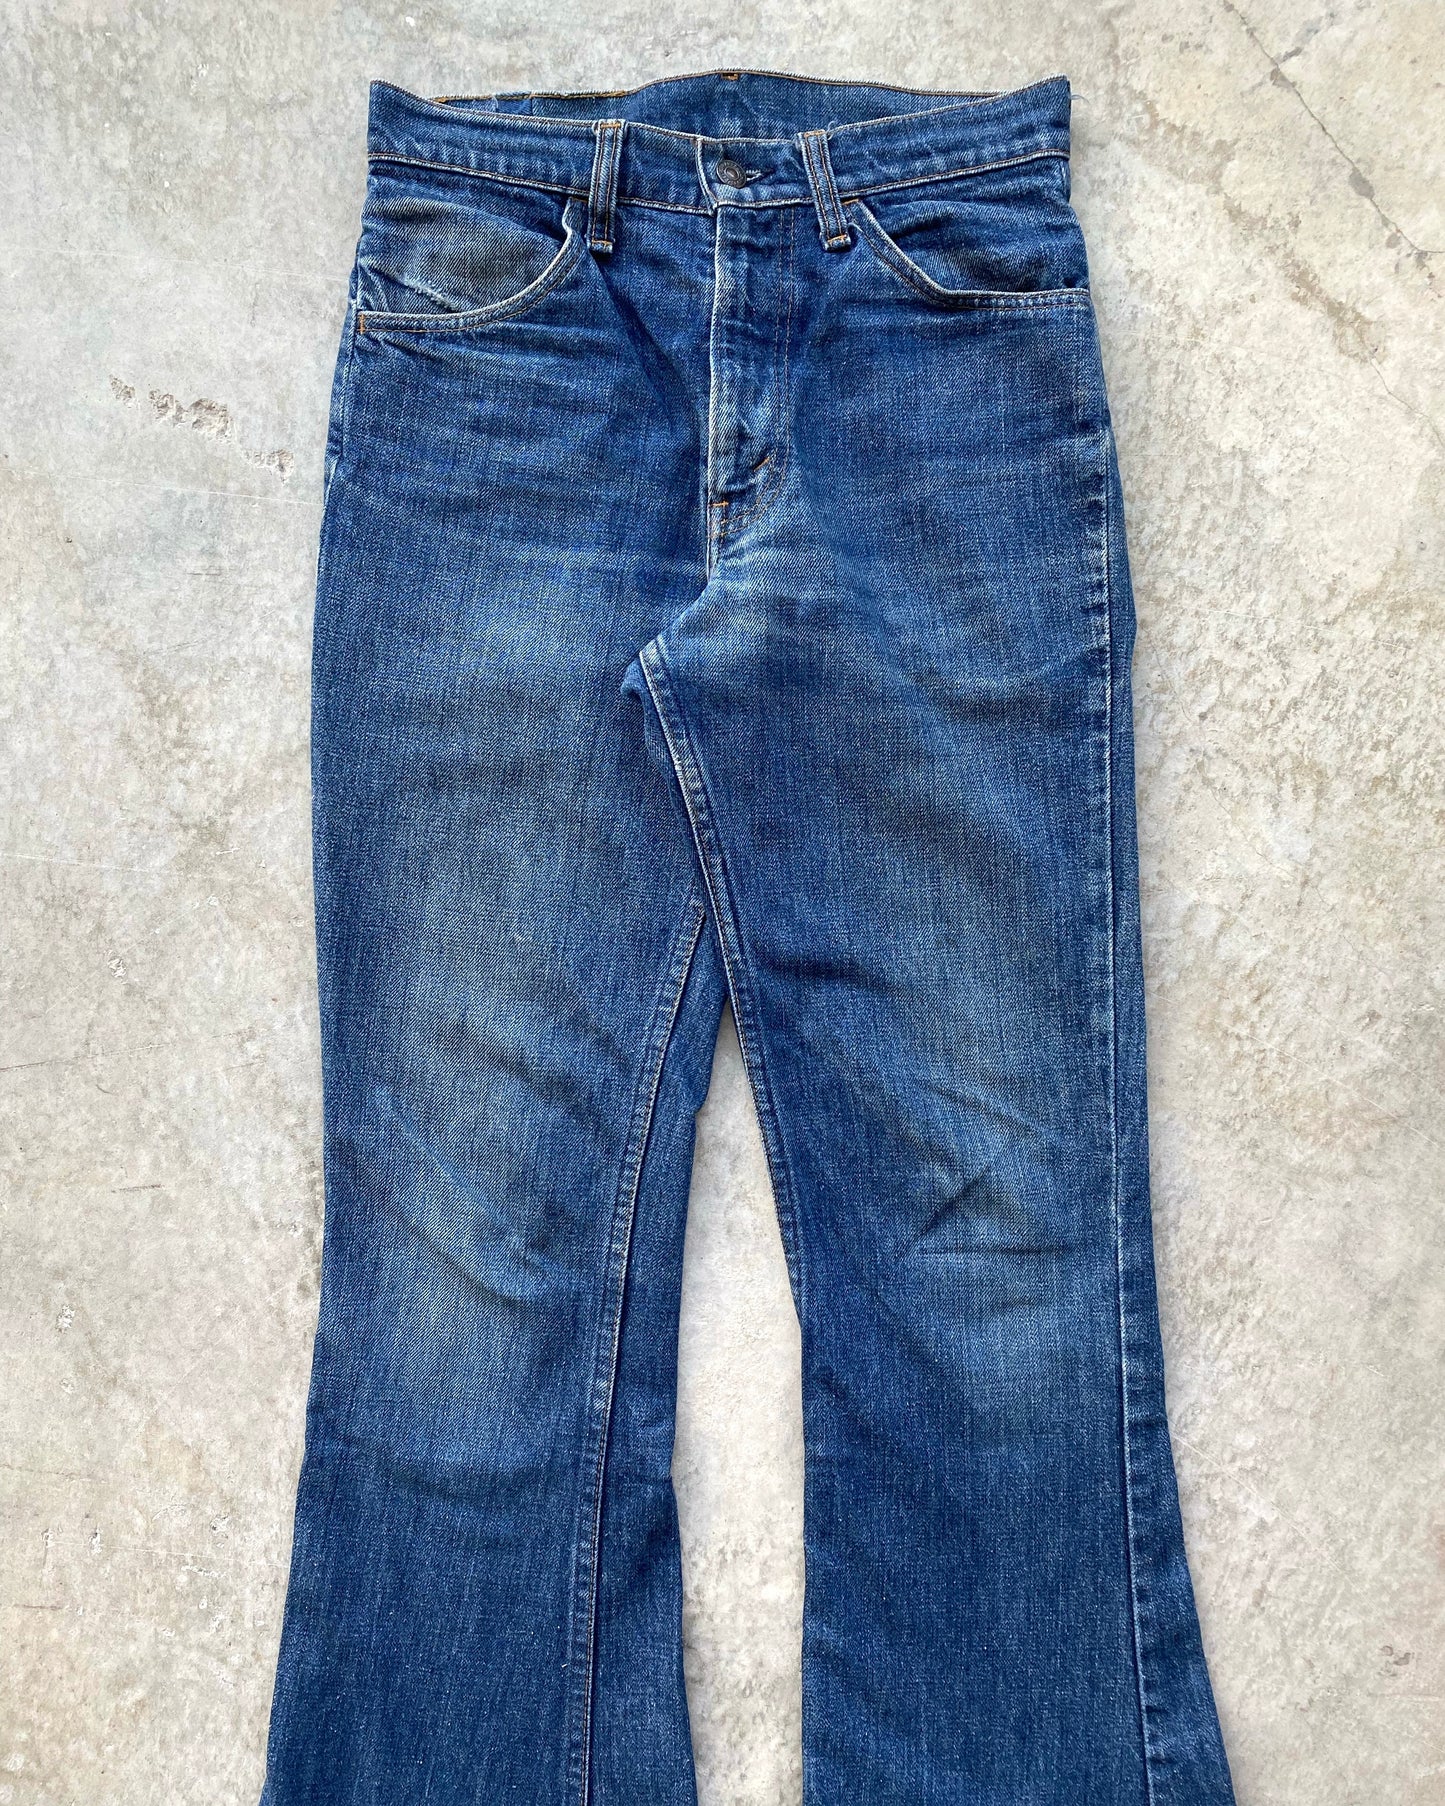 1970S MEDIUM WASHED LEVI'S 646 BOOTCUT JEANS (29X30)